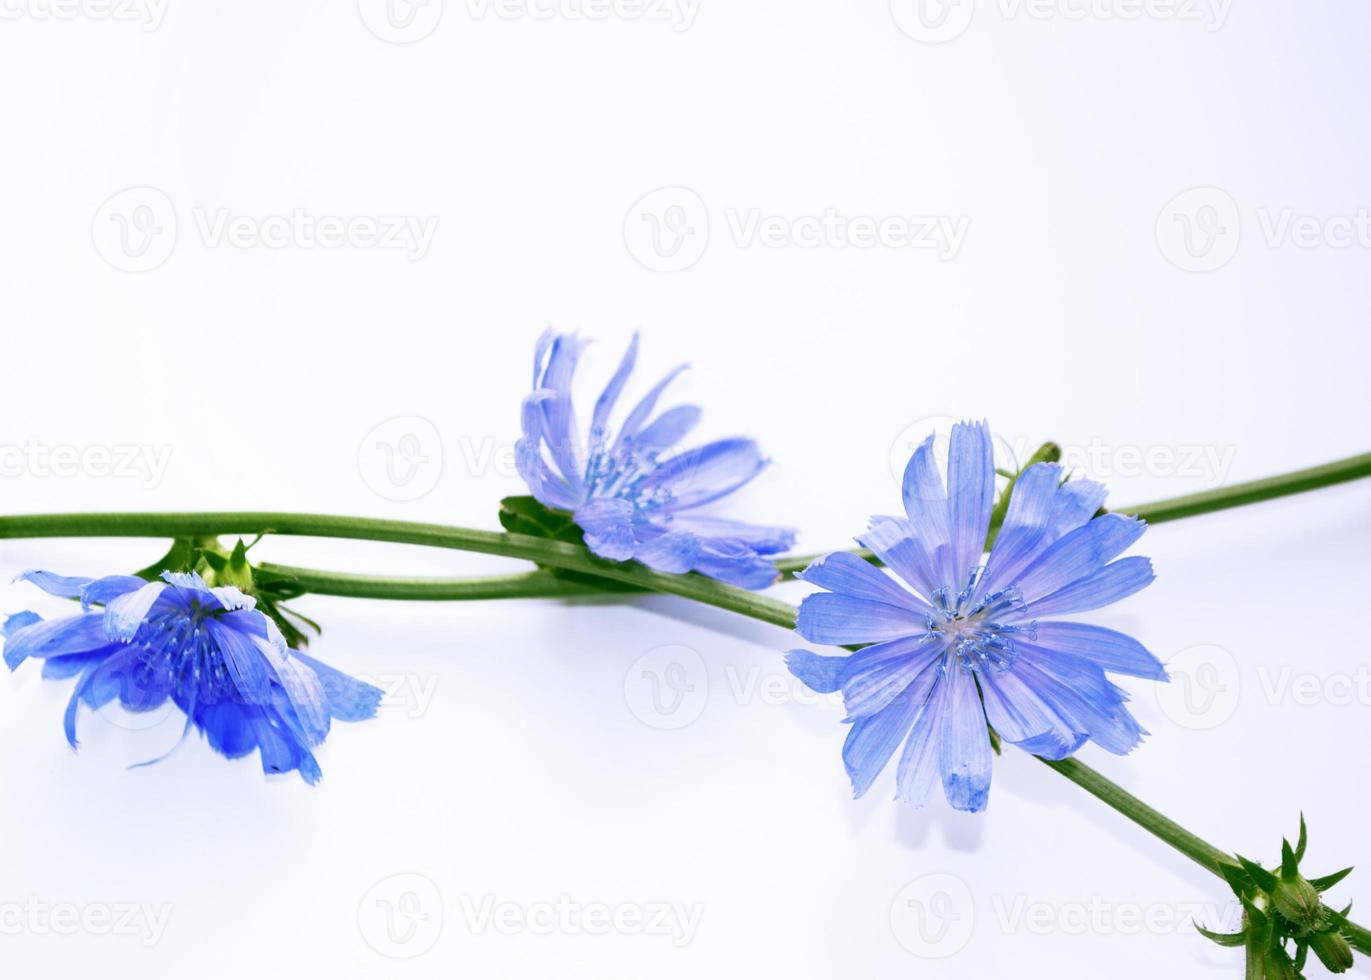 Chicory flower with leaf isolated on white background photo